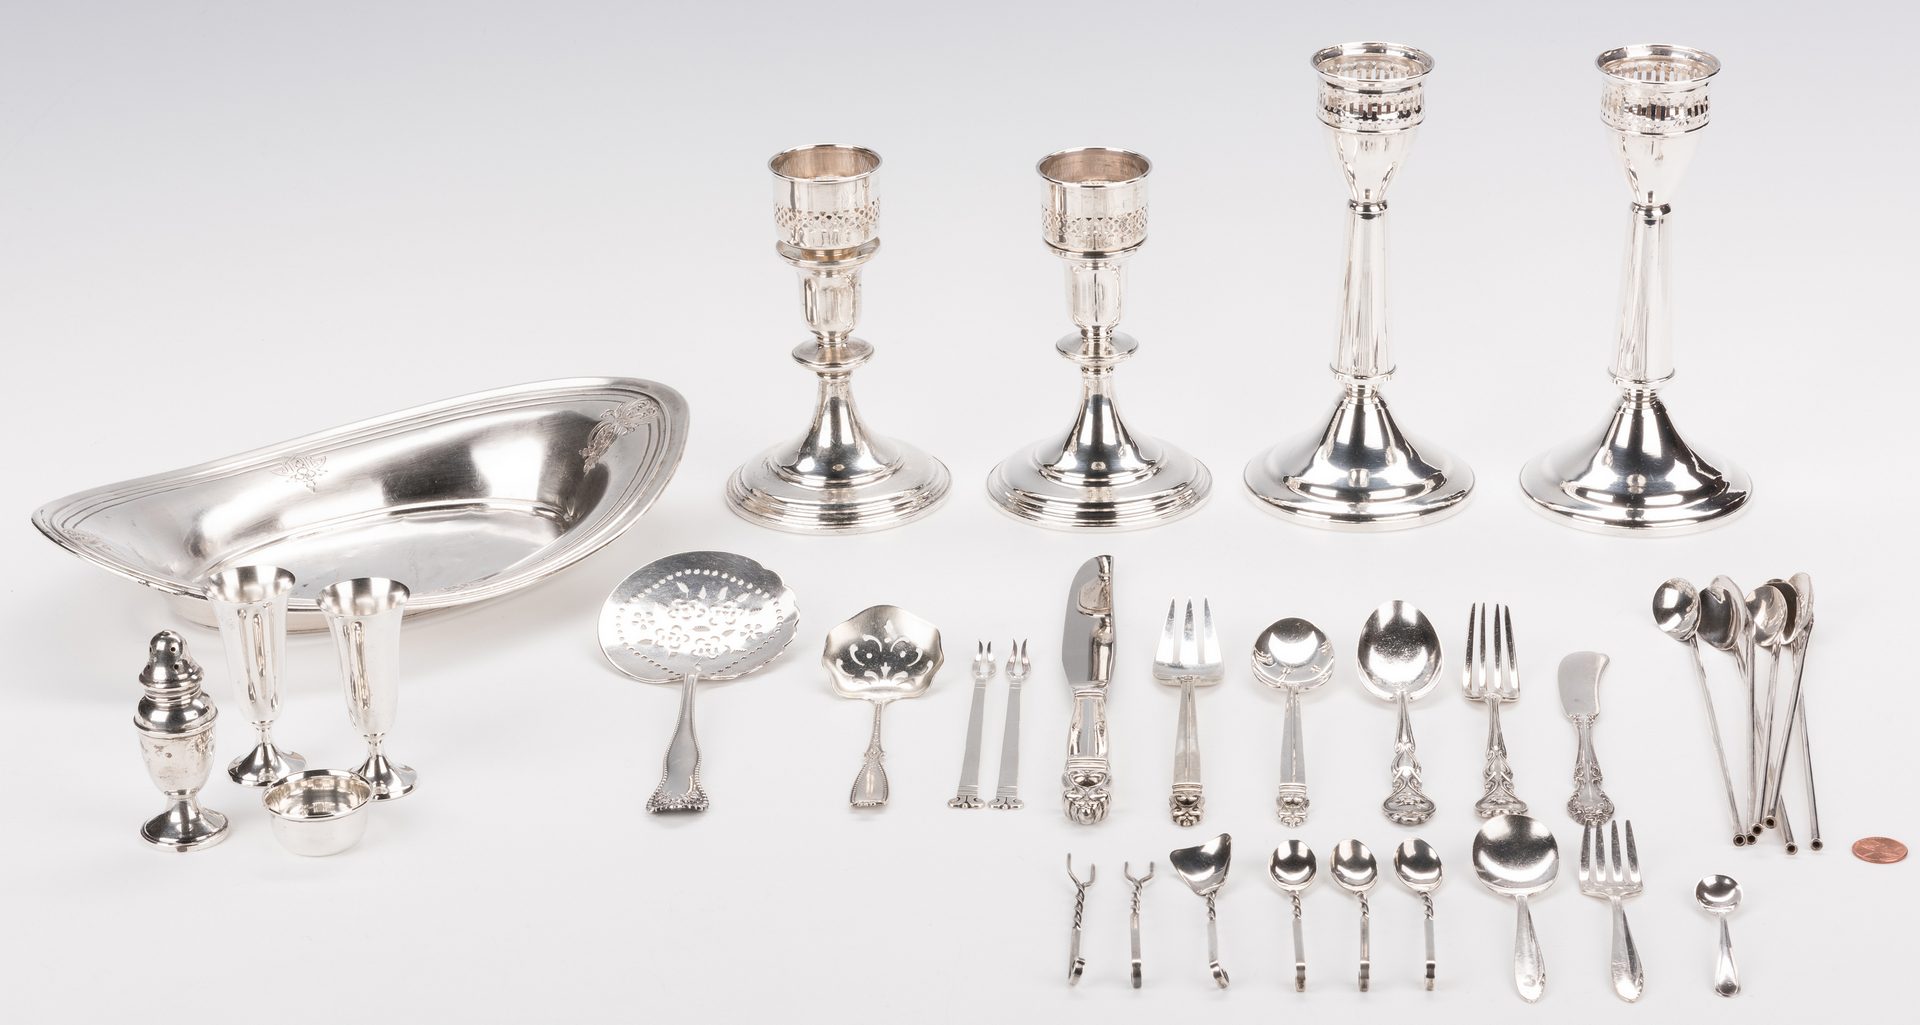 Lot 874: 35 pcs assd. sterling table items and flatware incl. candlesticks